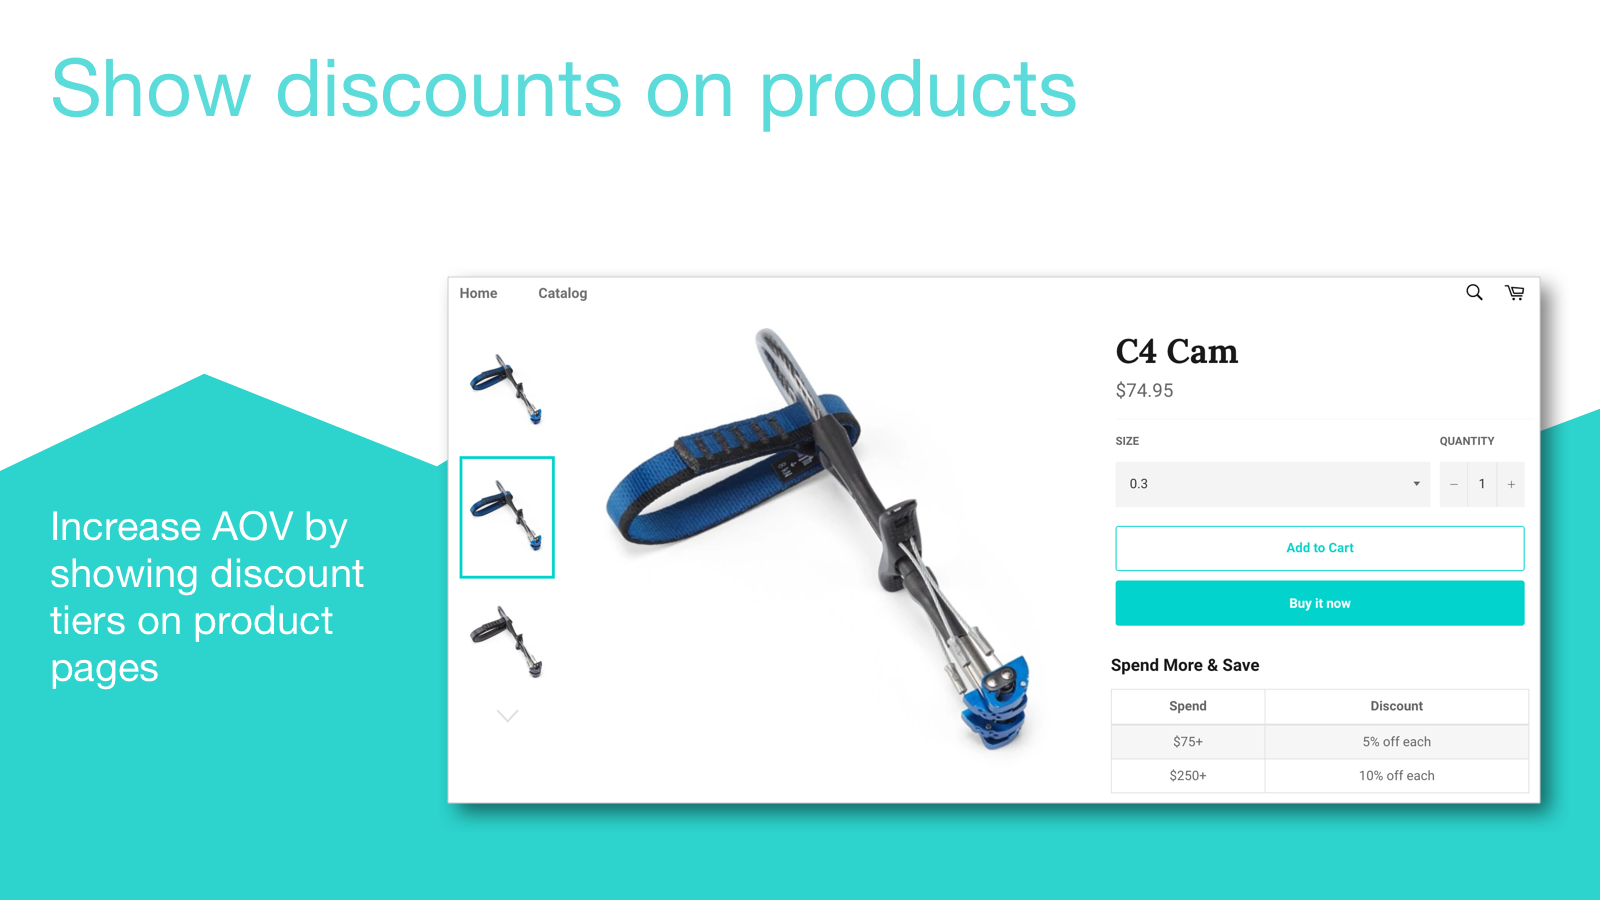 Show discount tiers on product pages